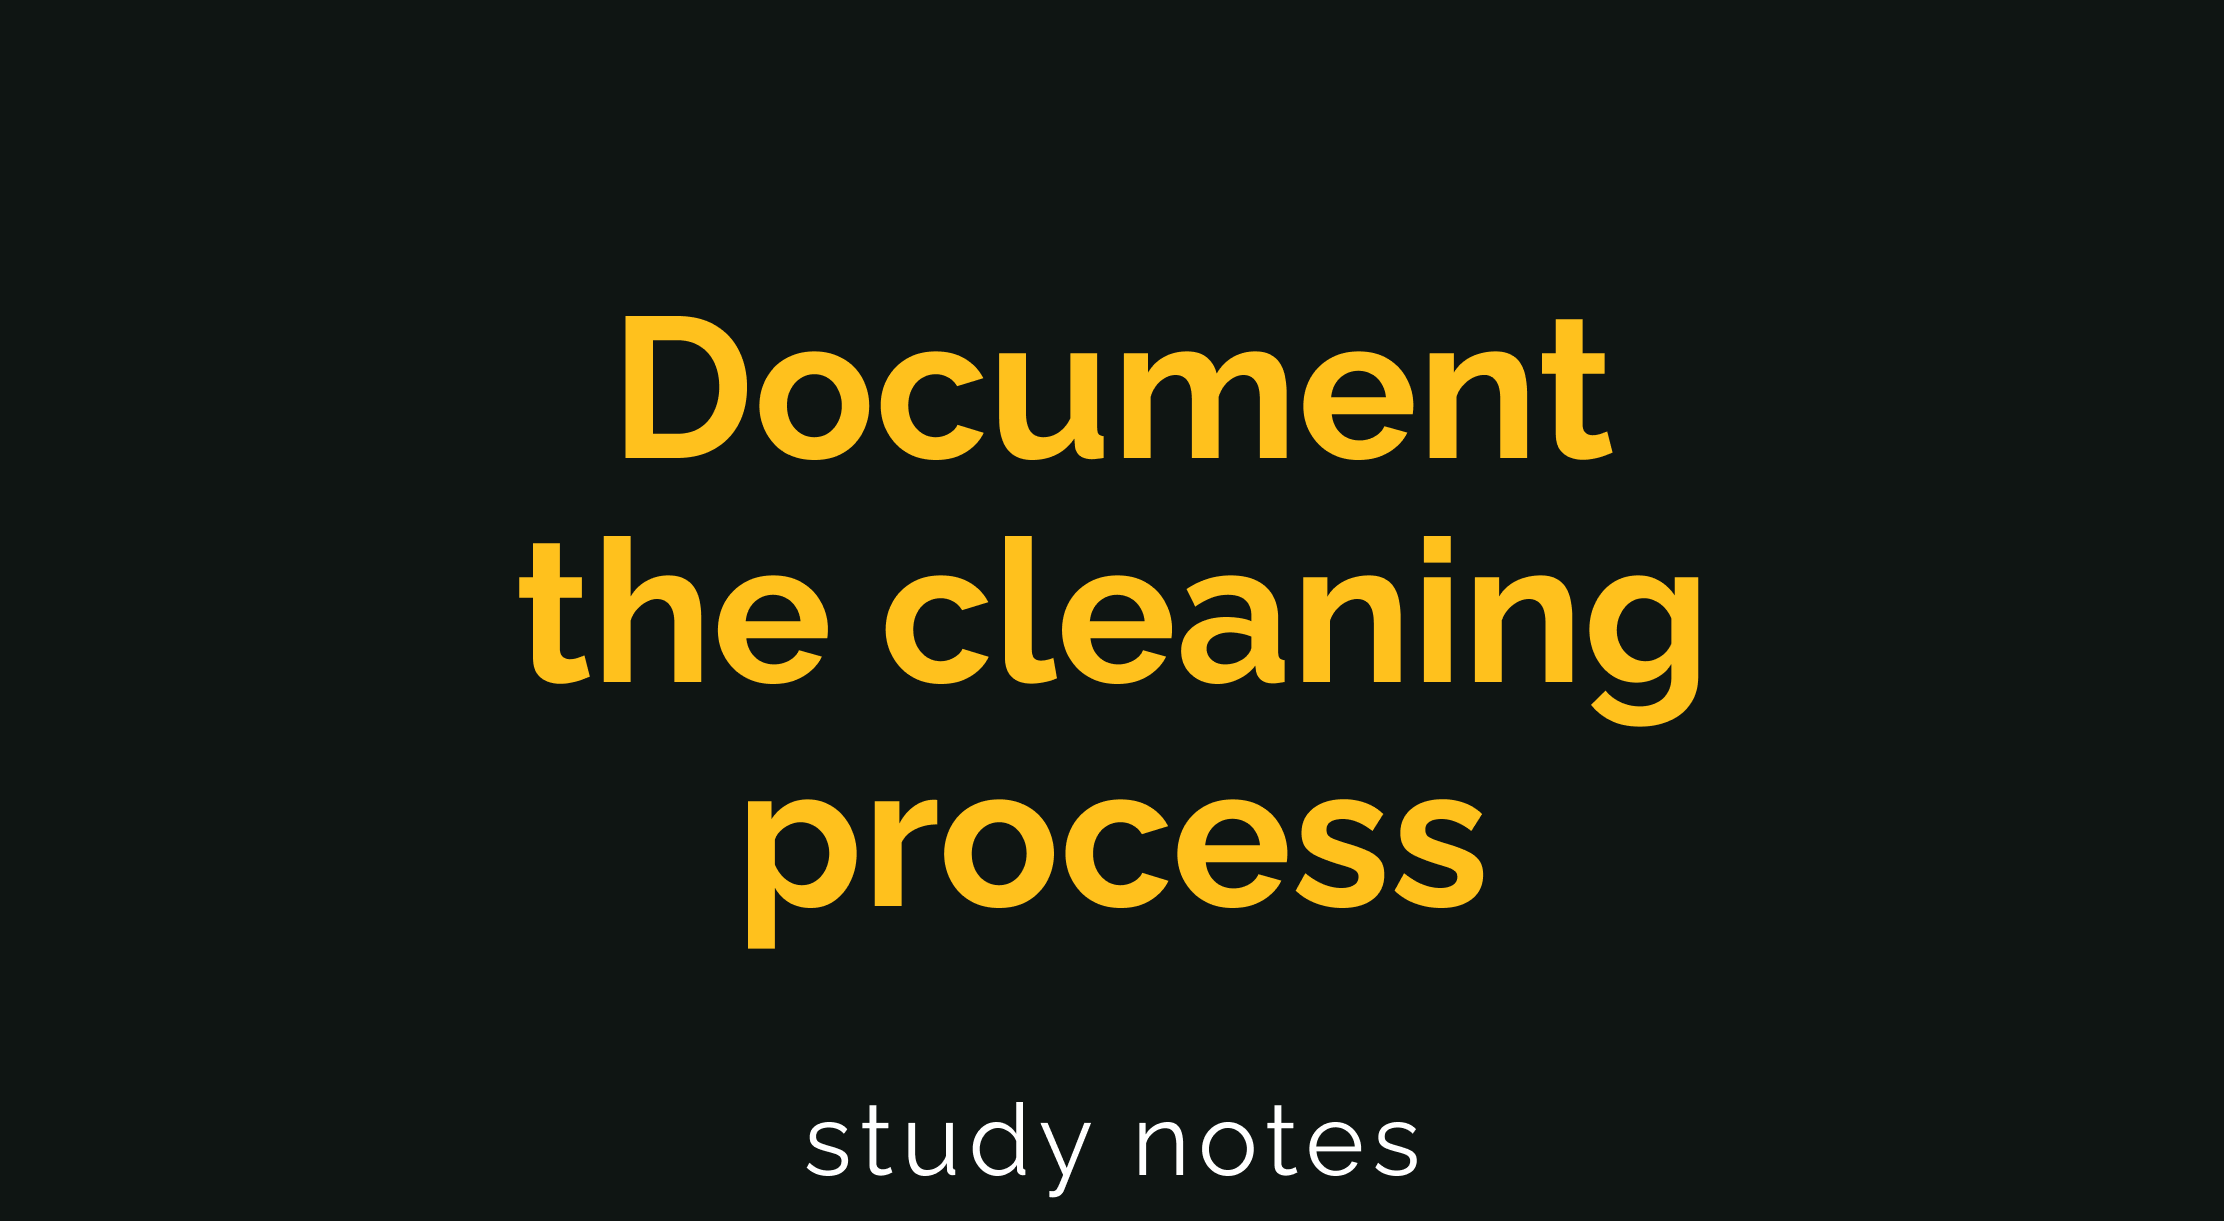 Document the cleaning process